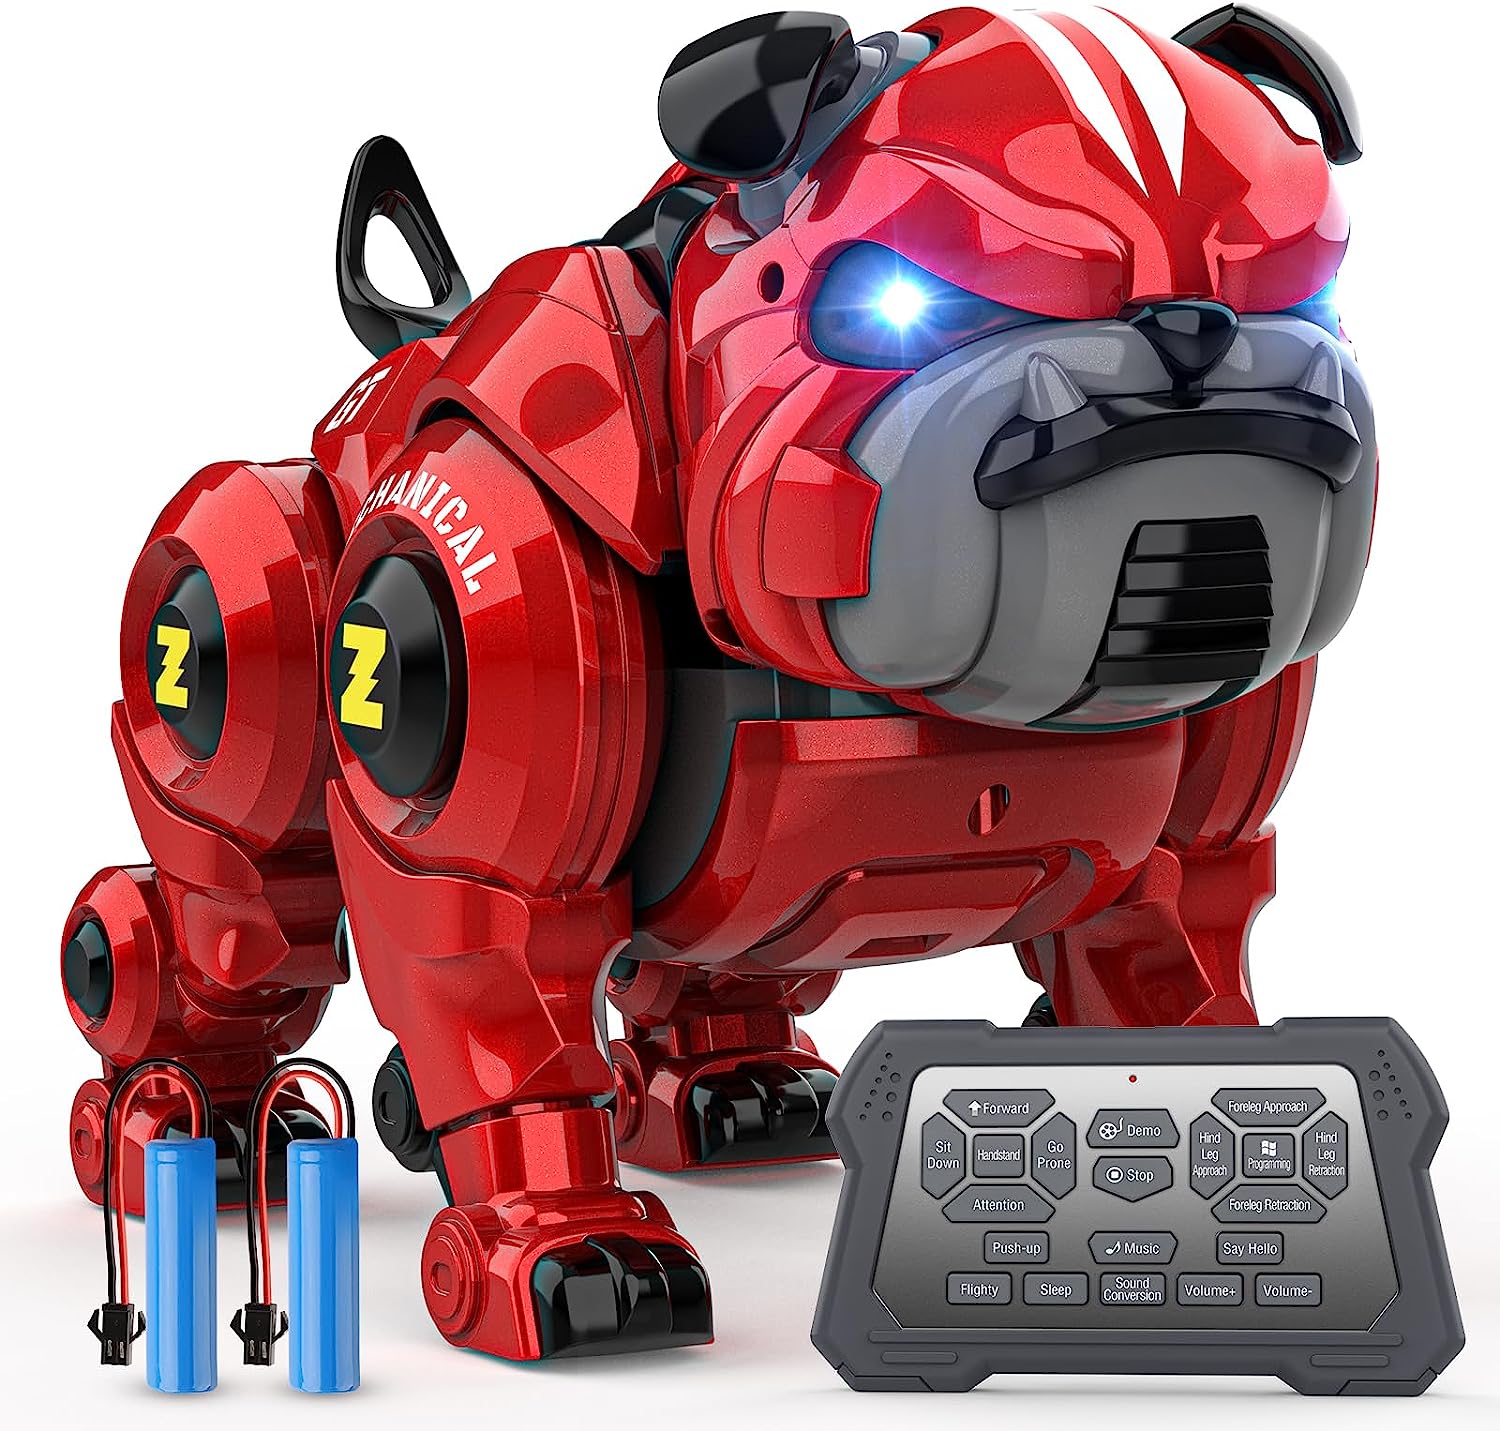 Lterfear Robot Dog Toys for Boys Review: The Perfect Companion for Fun and Learning